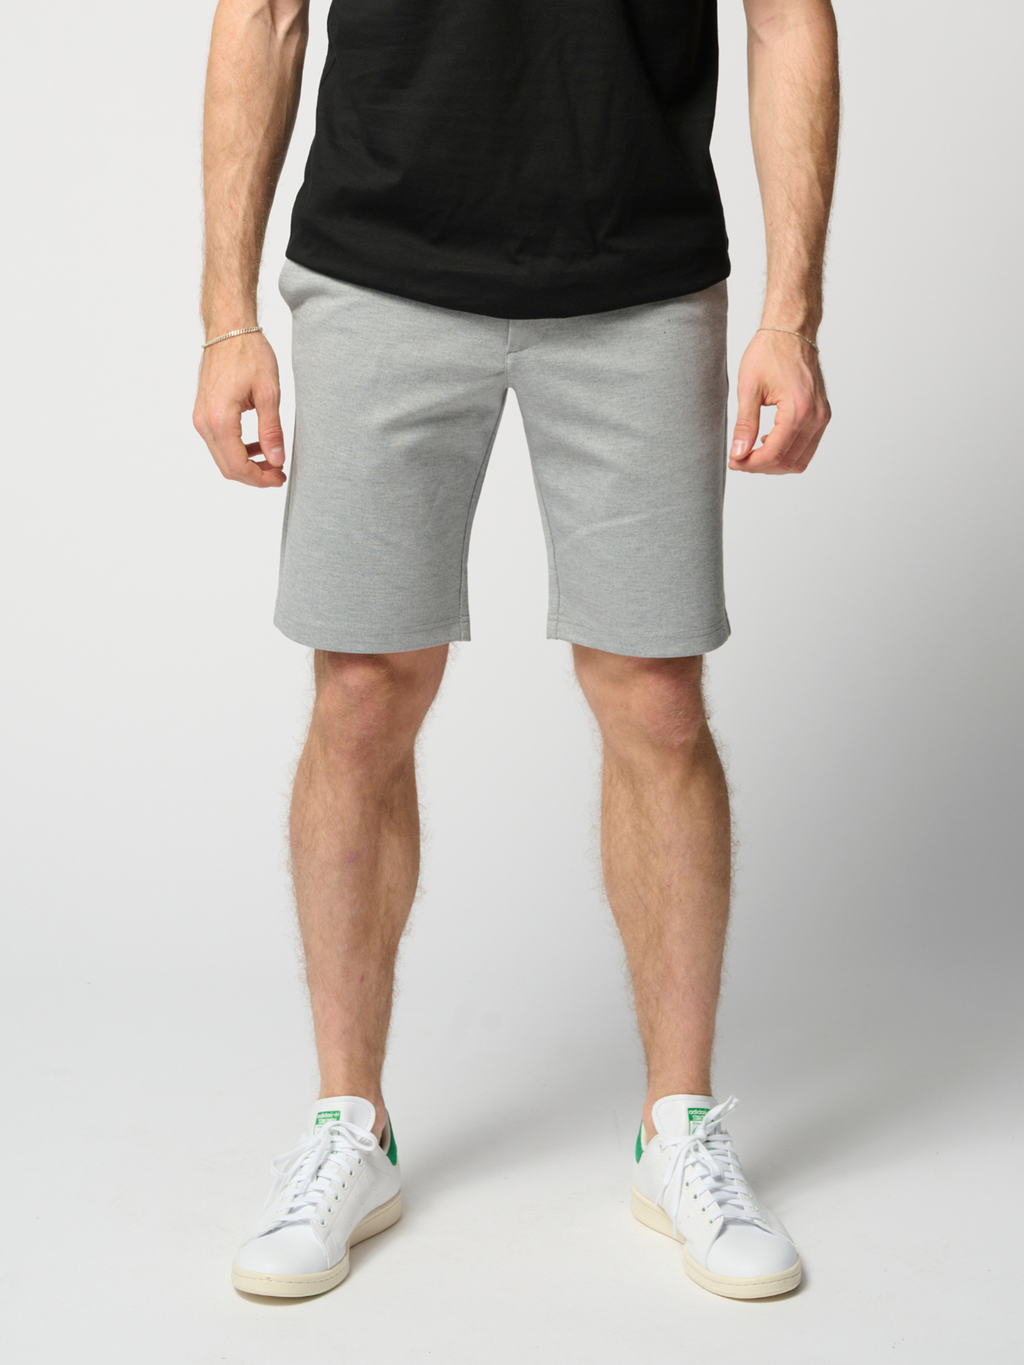 Performance Shorts - Drizzle